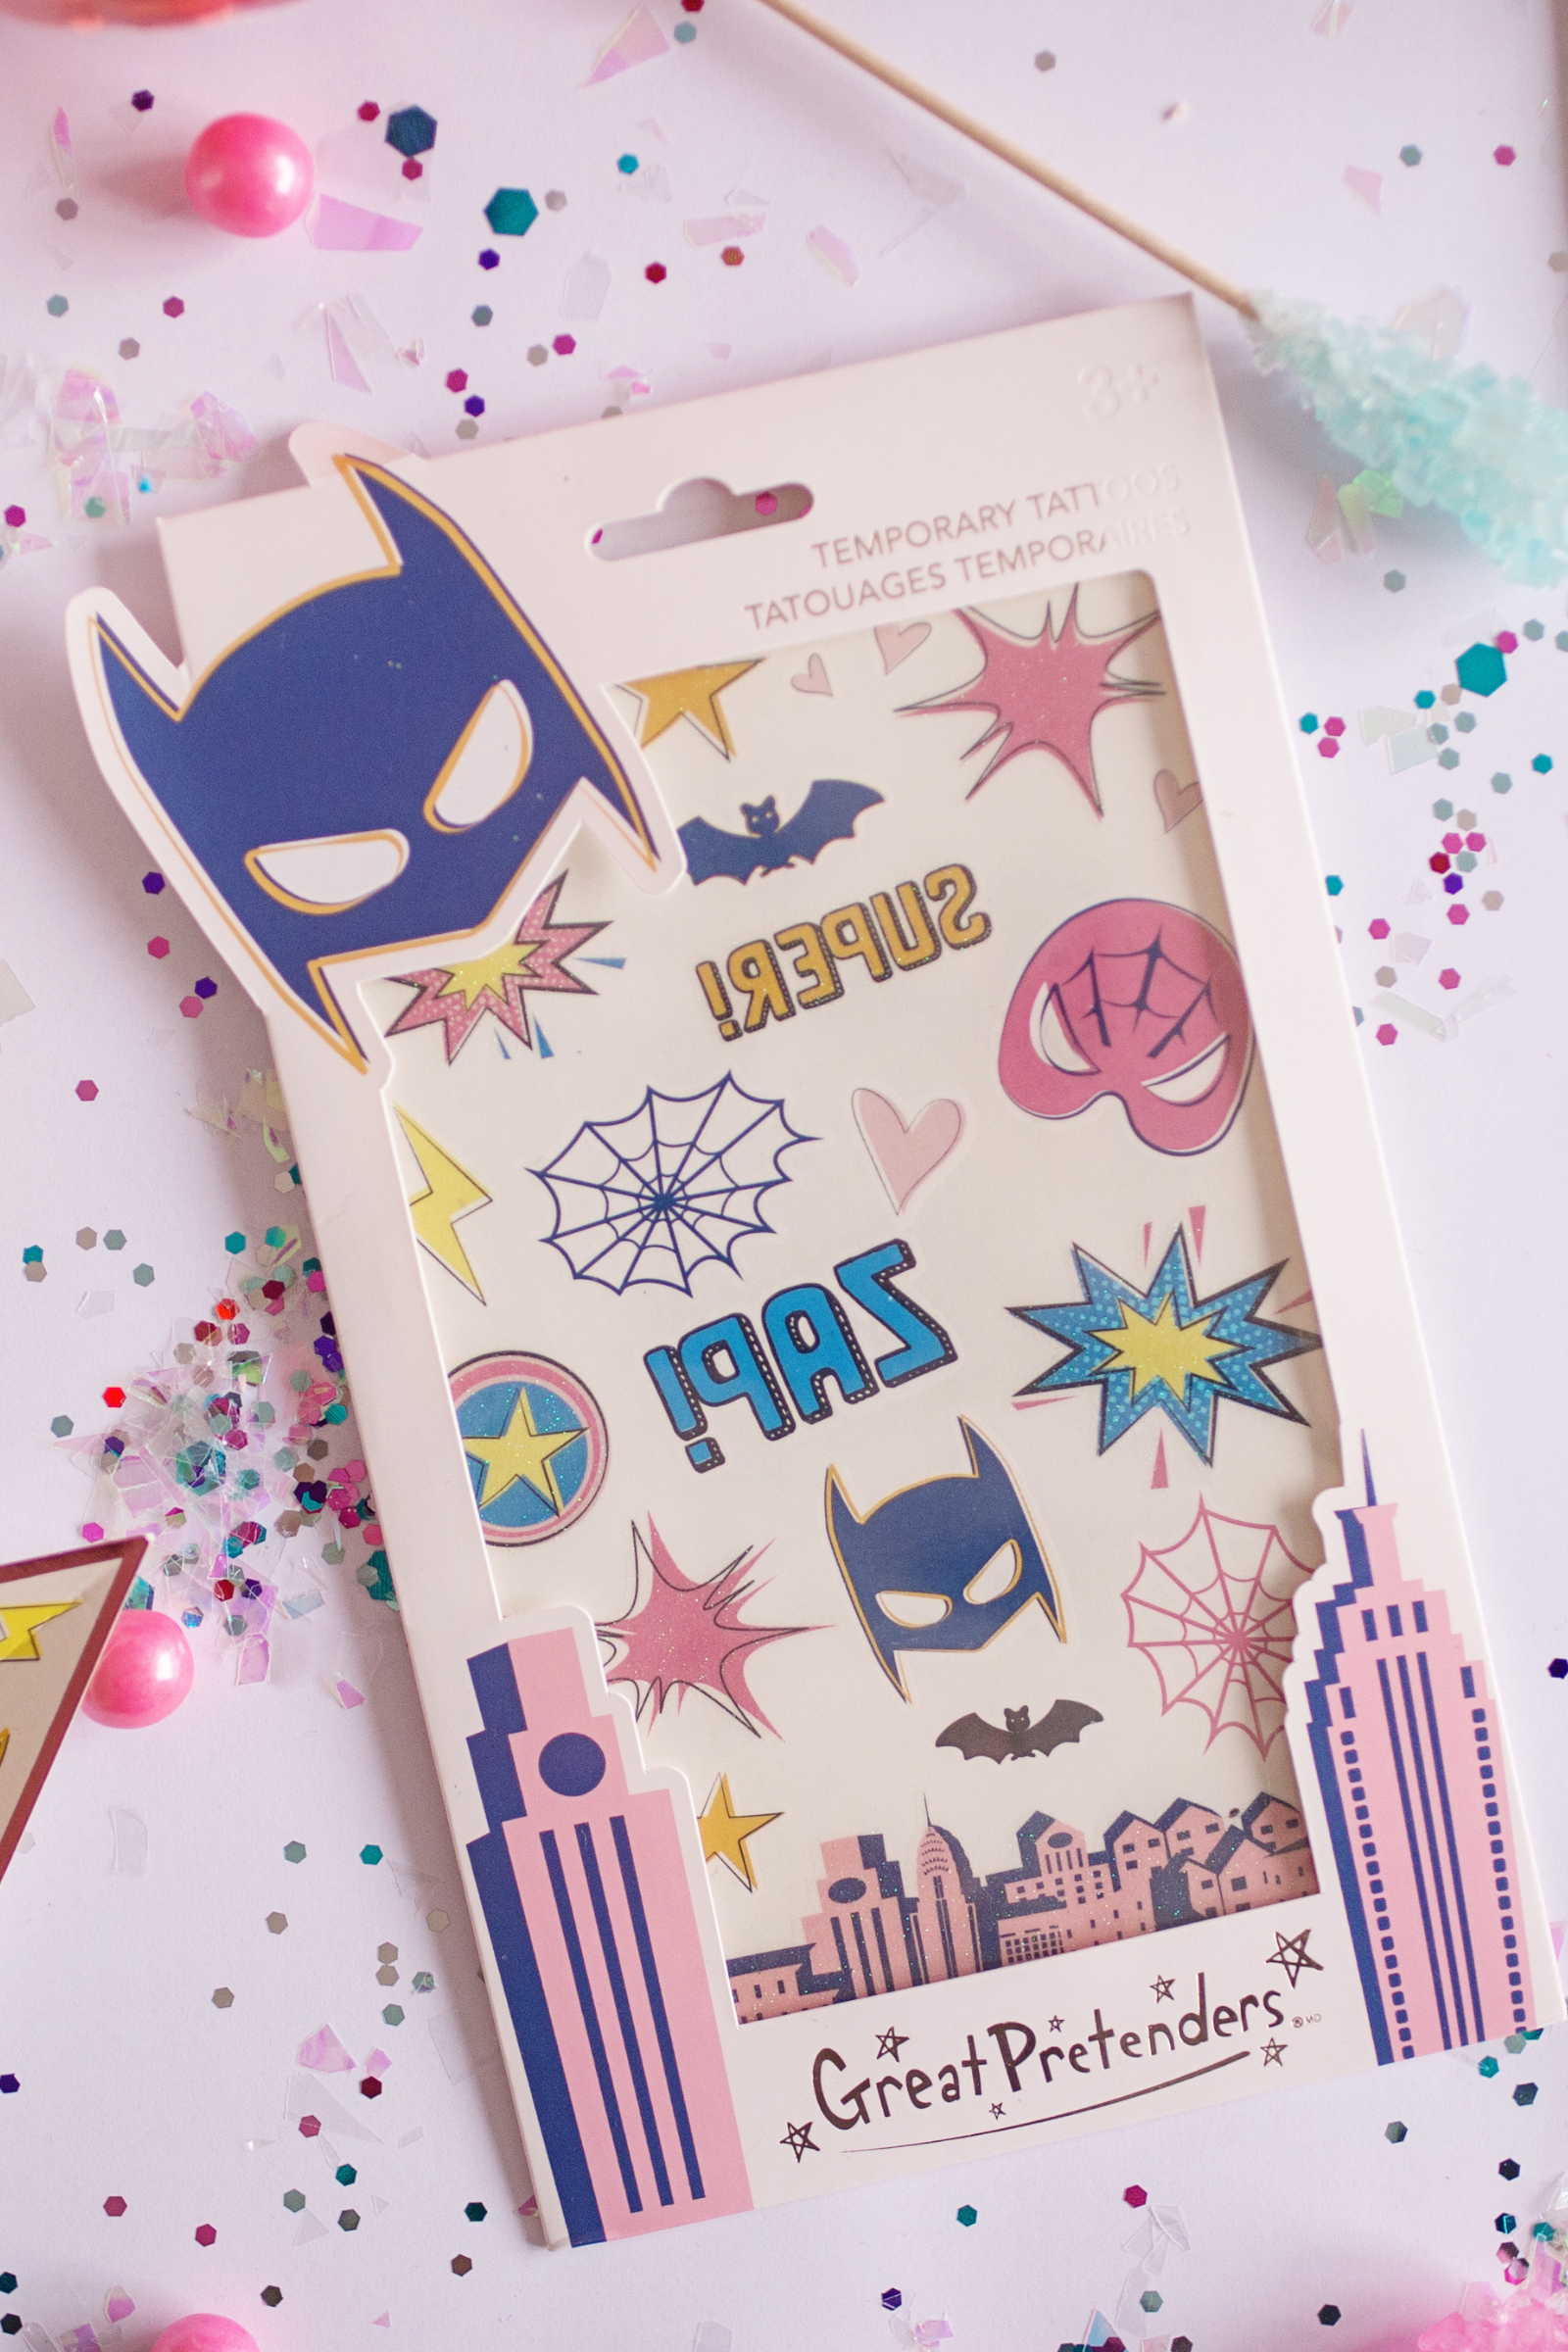 Pack of Stars Temporary Tattoos - Tattoos For Fun